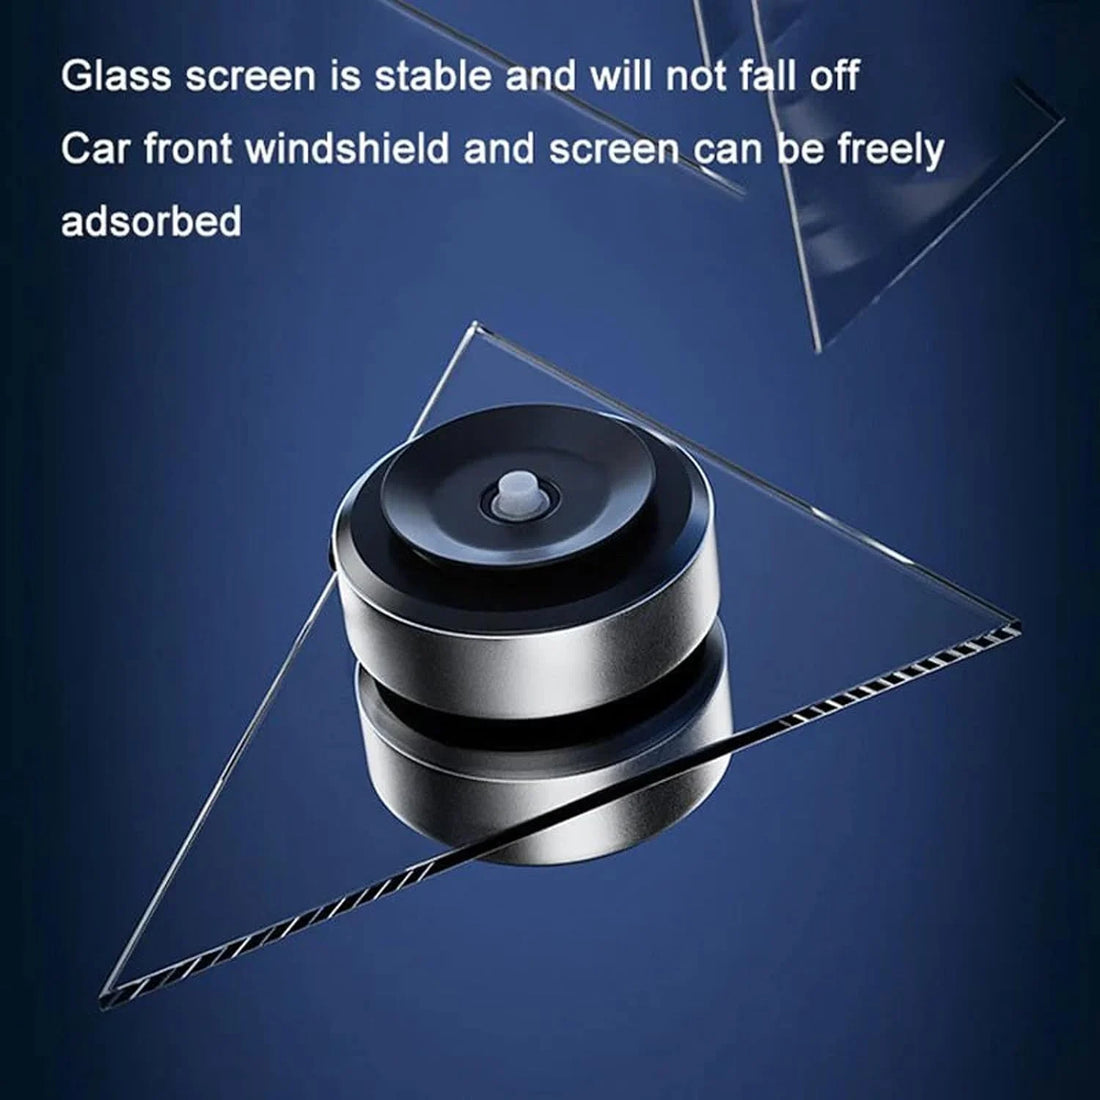 Double-Sided Phone Holder 3.0 Innovative Dual Suction Cup and Magnetic Design